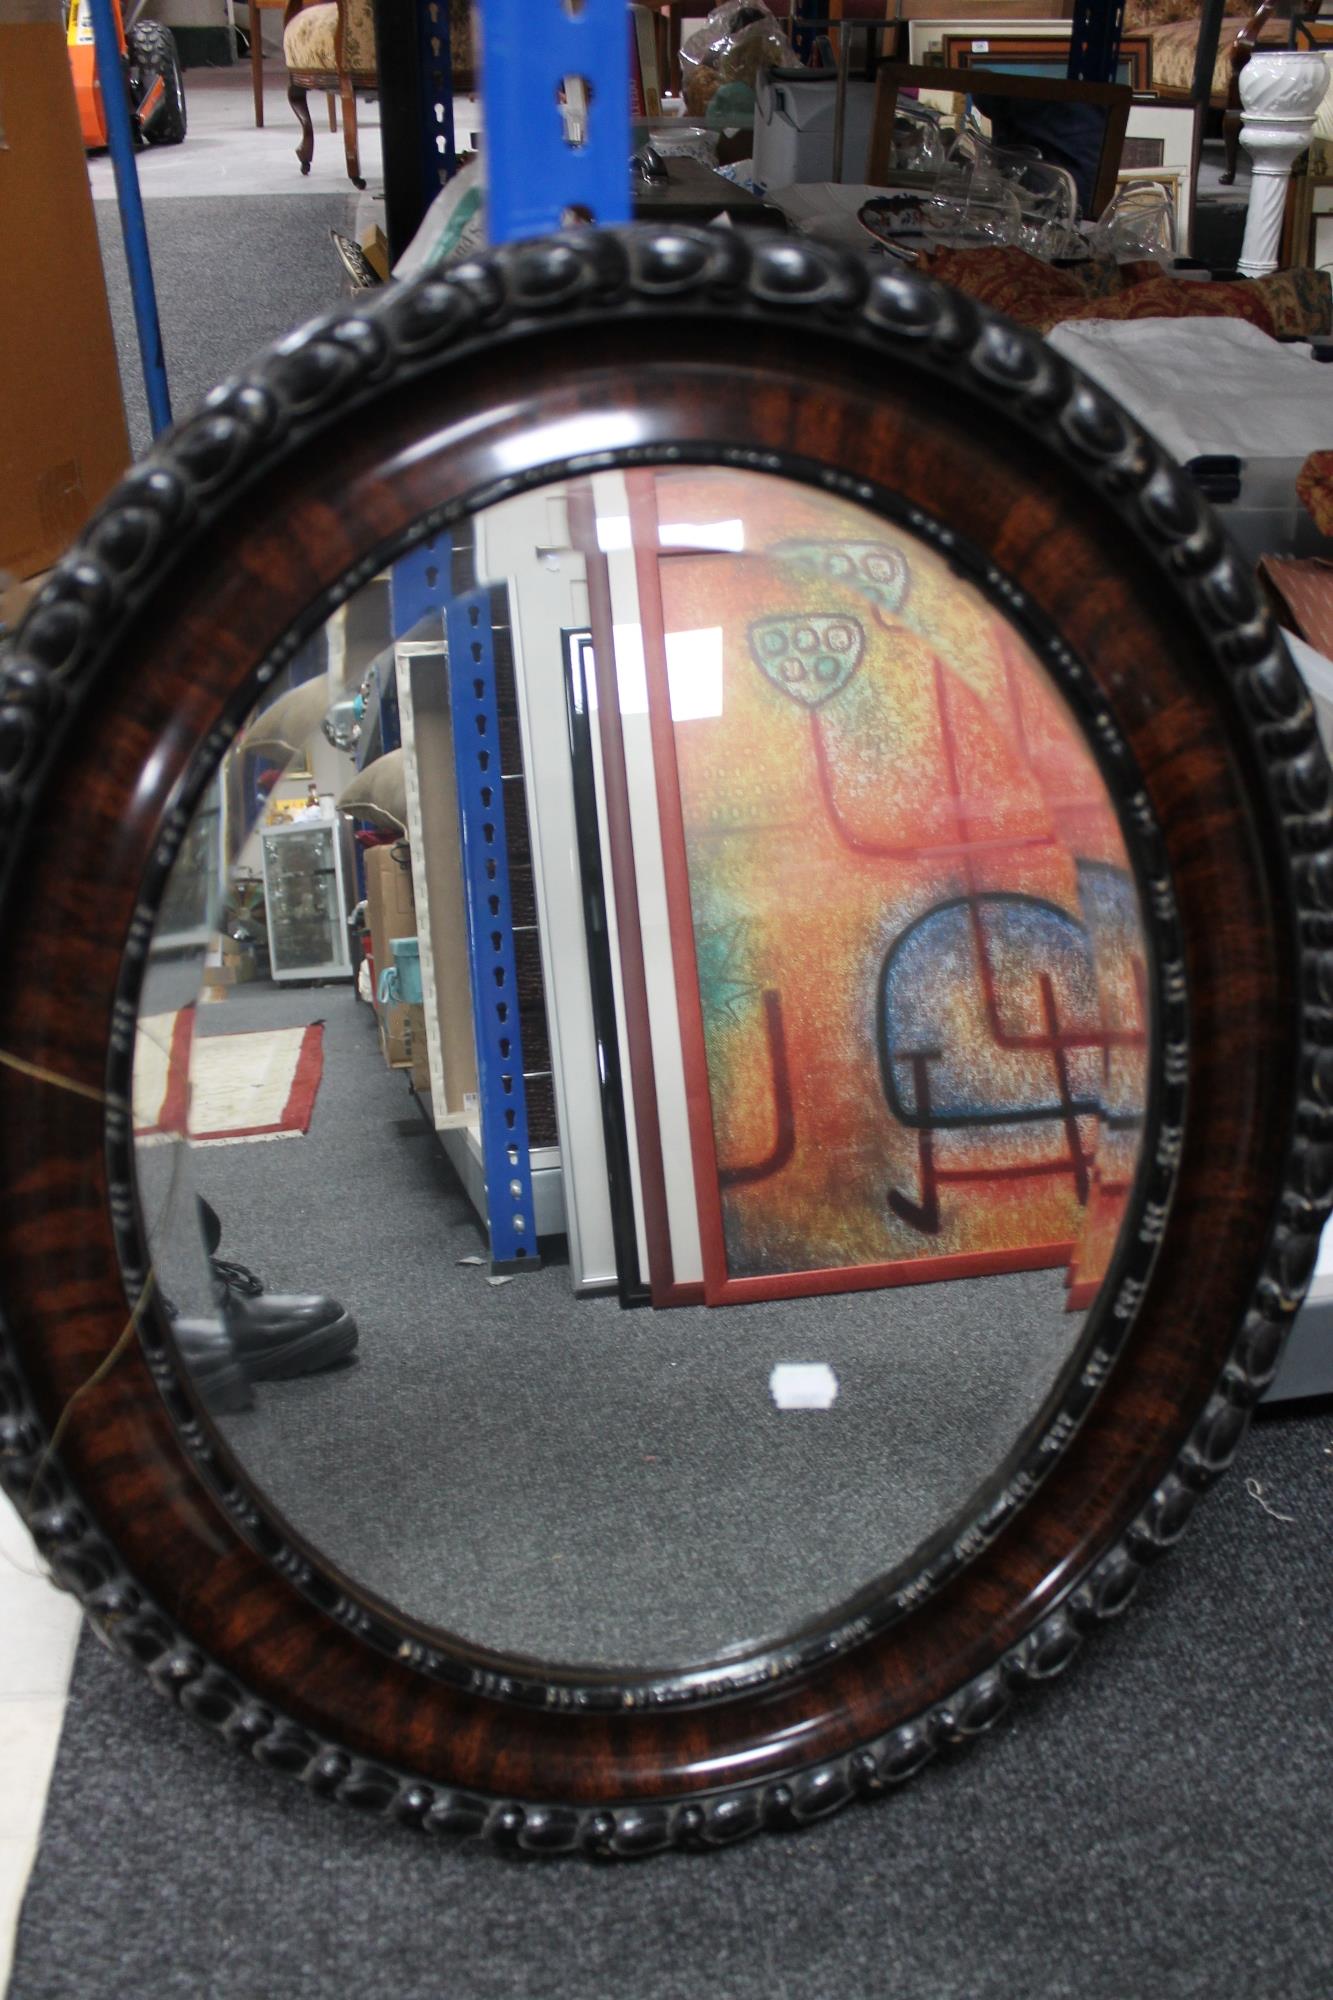 An Edwardian bevelled oval mirror